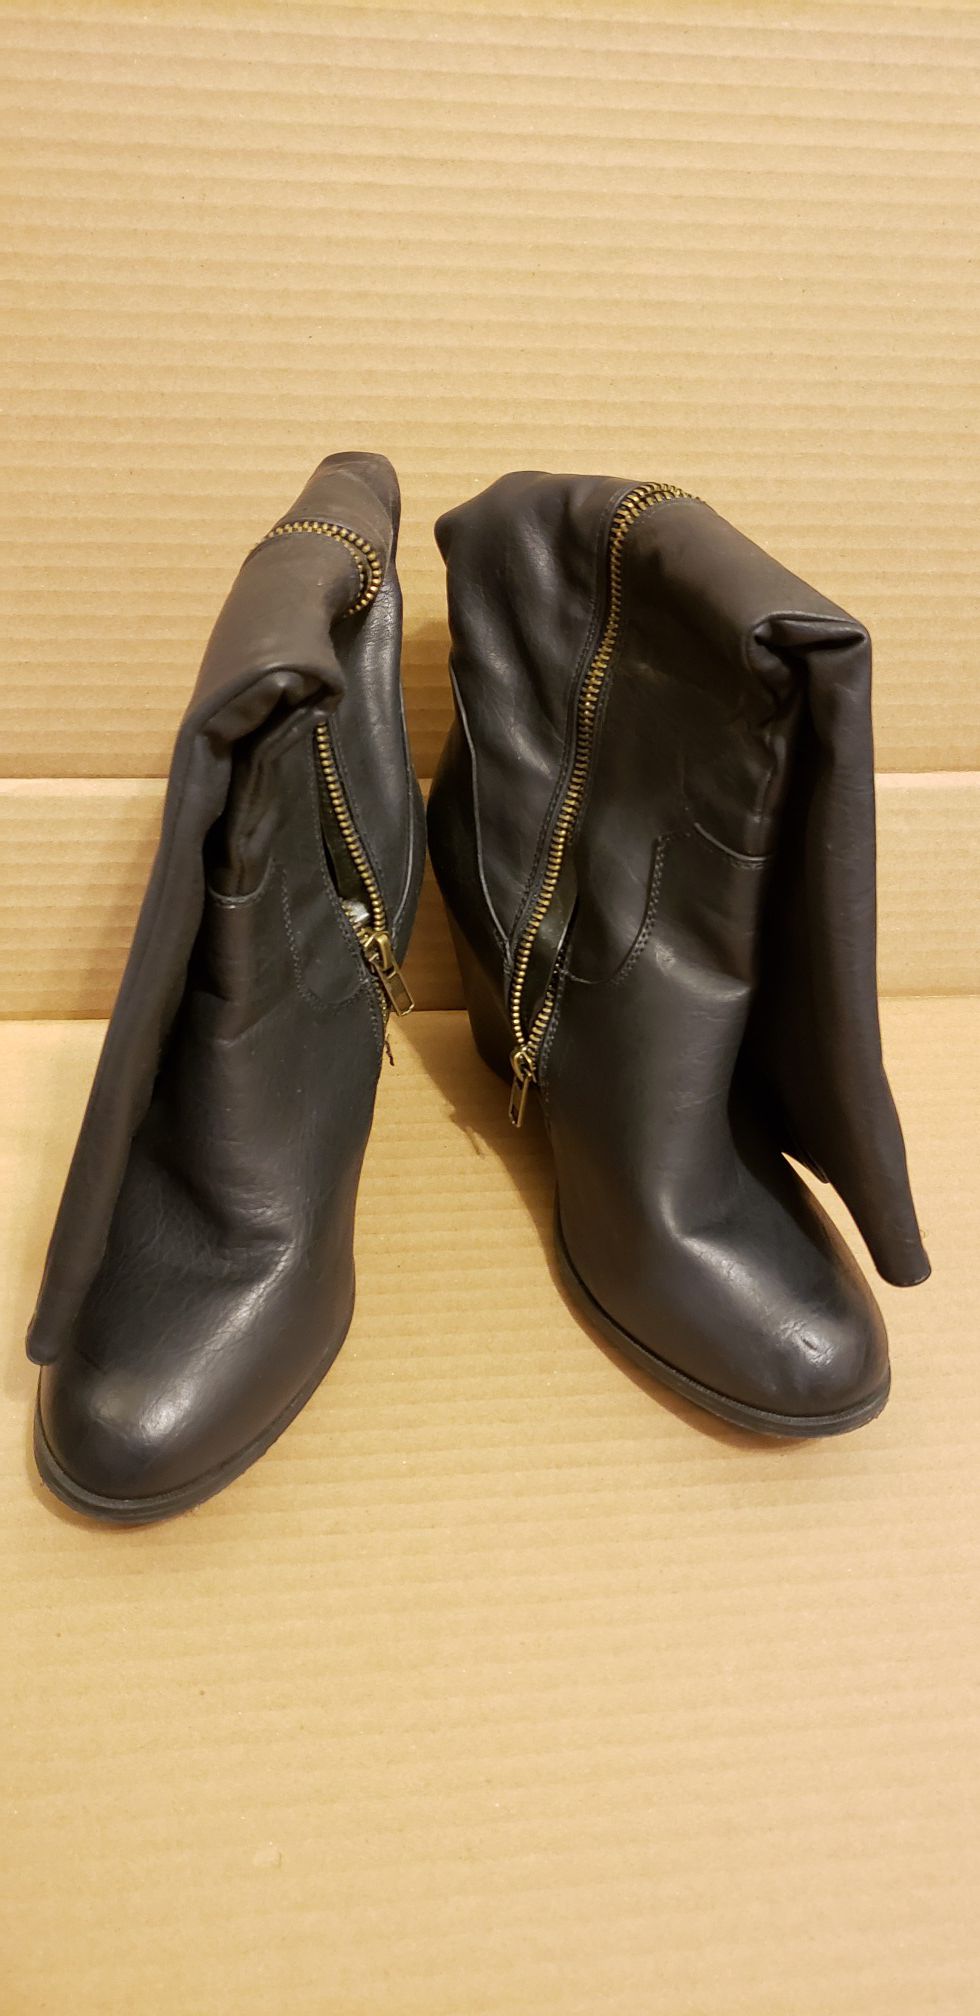 Black Size 9 High Boots